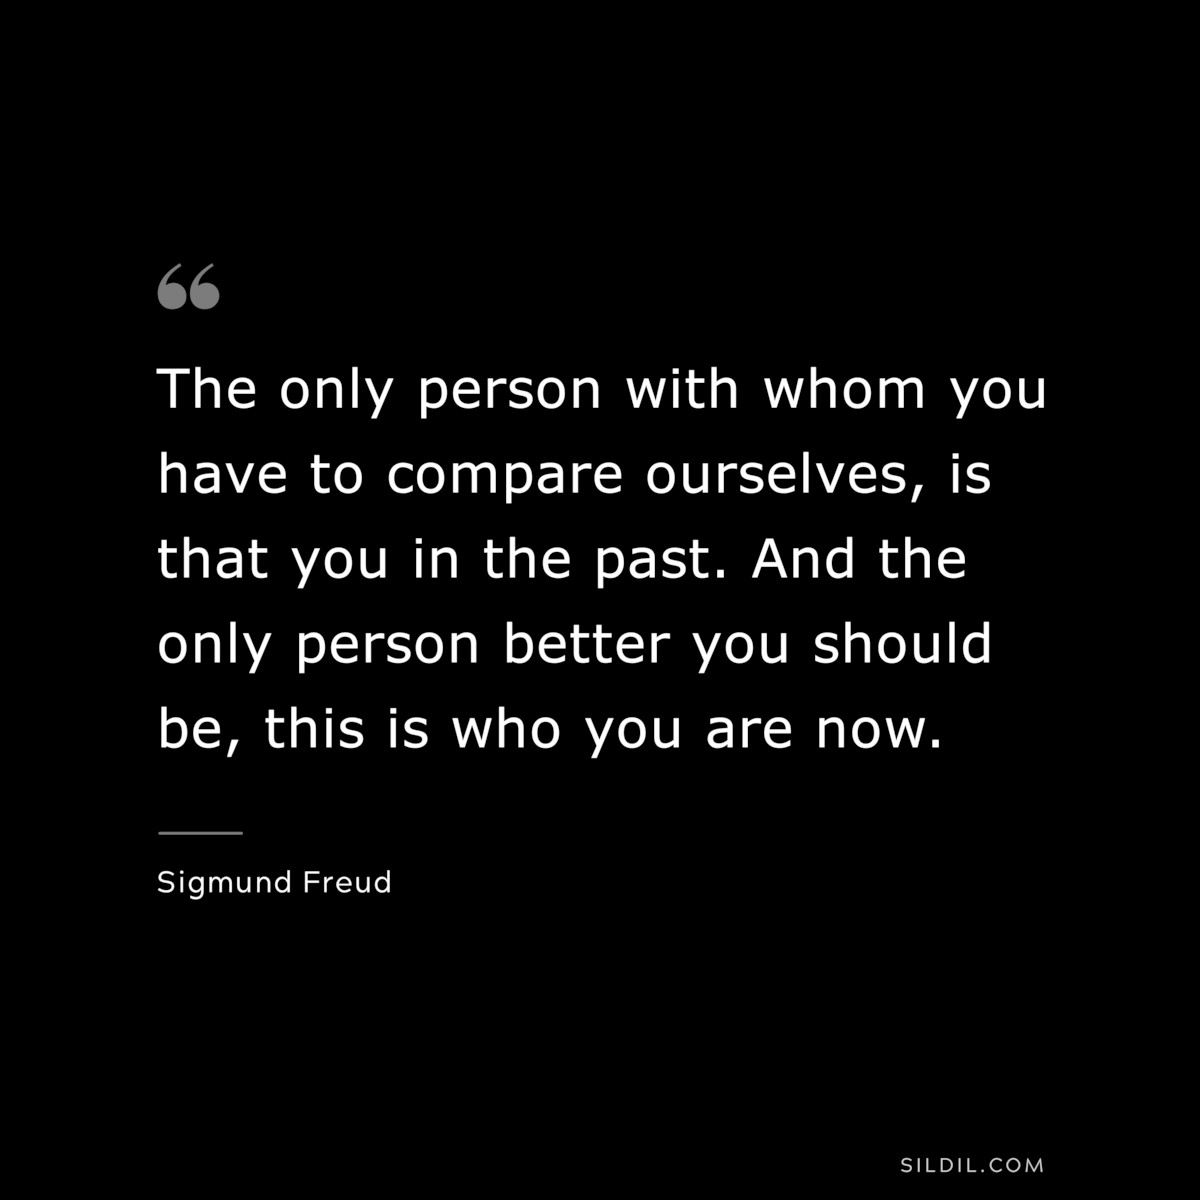 The only person with whom you have to compare ourselves, is that you in the past. And the only person better you should be, this is who you are now. ― Sigmund Frued